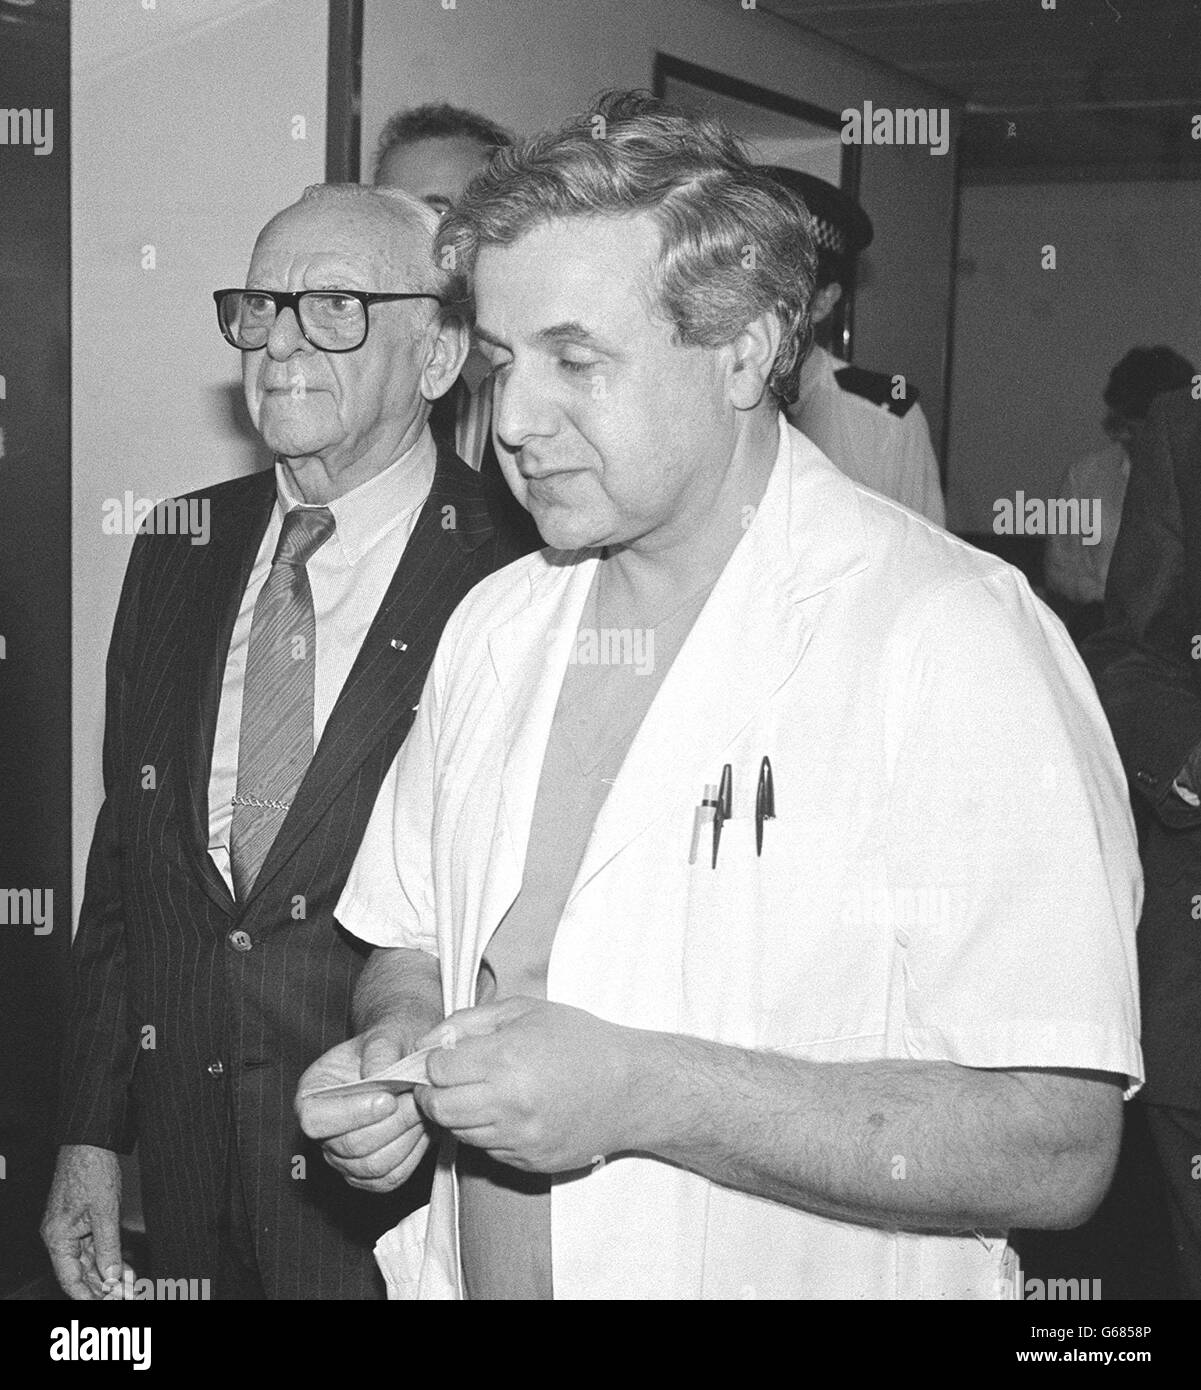 Dr Armand Hammer, 90-year-old chairman of Los Angeles-based Occidental Petroleum (glasses) is accompanied by Graham Page, Aberdeen Royal Infirmary's accident and emergency department consultant during his visit to casualties of the North Sea oil platform, Piper Alpha. Dr Hammer, whose company operated the doomed offshore platform, flew into Aberdeen. Stock Photo